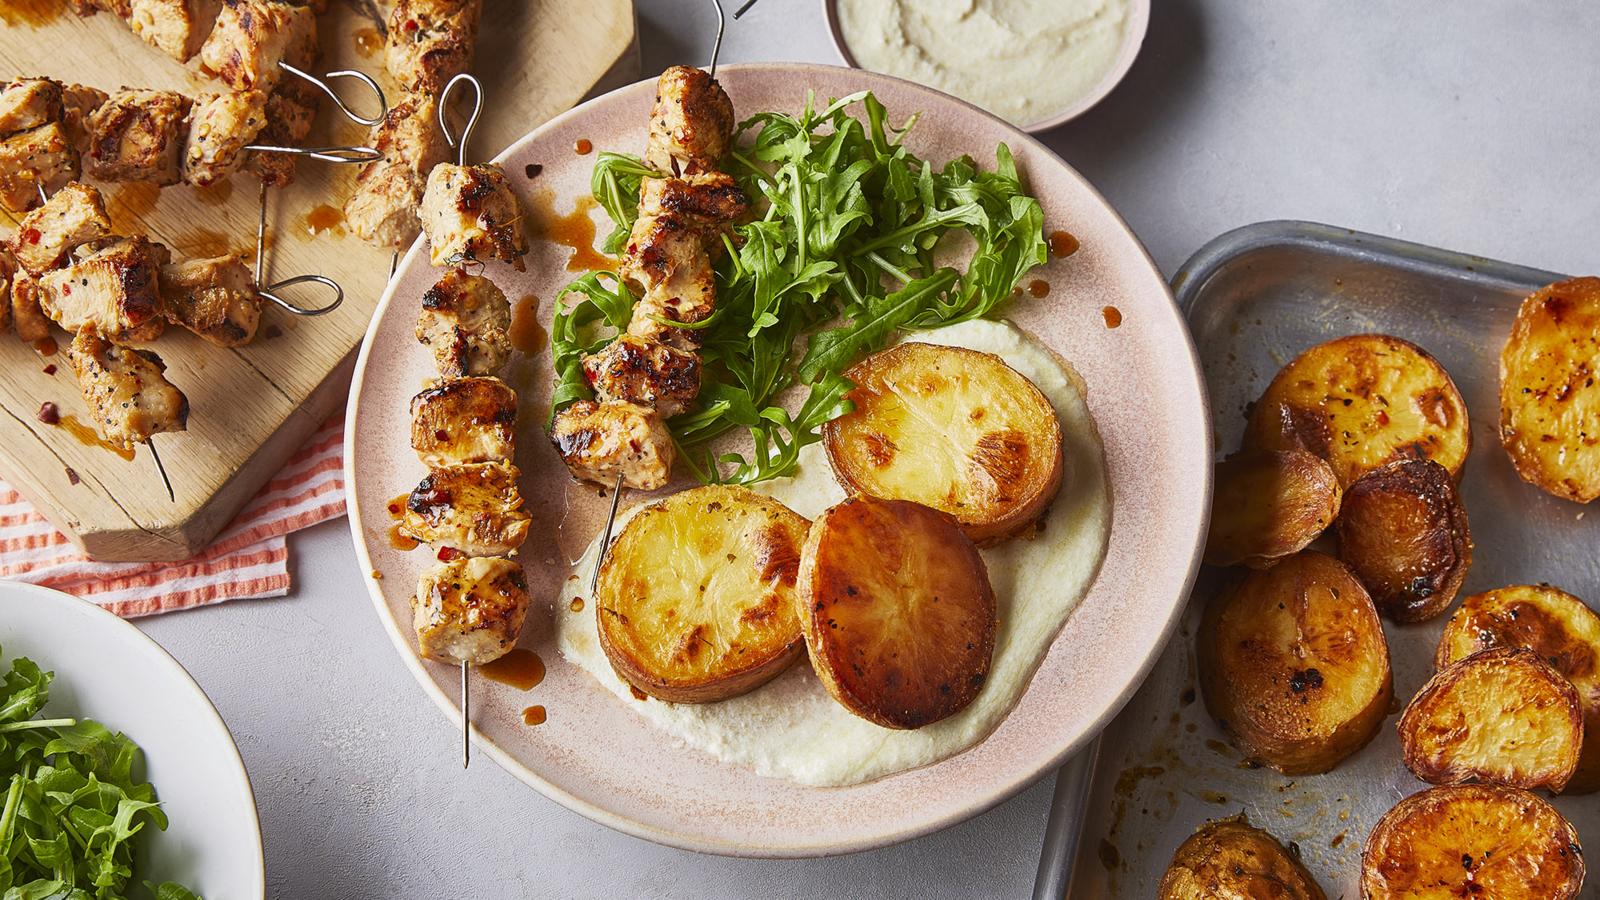 Chicken skewers with lemon-roasted potatoes recipe - BBC Food